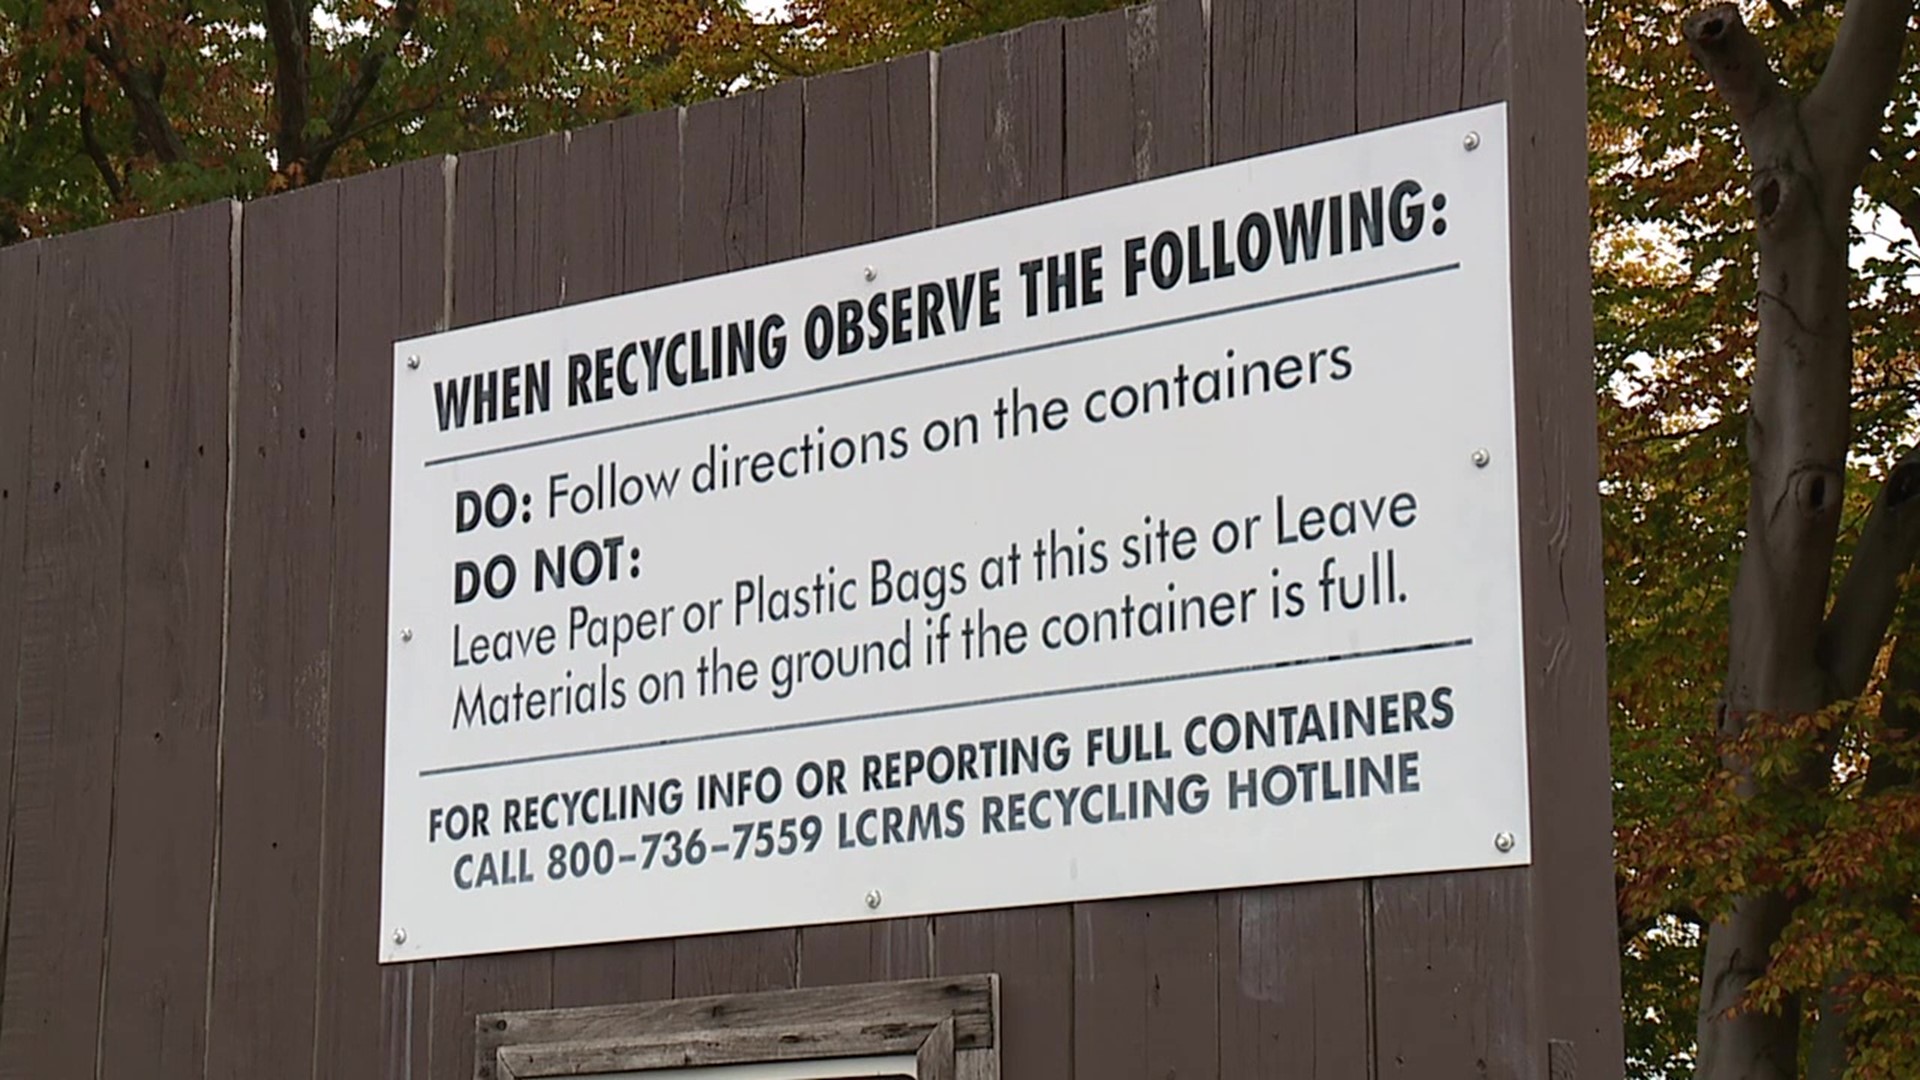 Folks in Lycoming County are disposing of waste at a recycling site and it may have to shut down because of it.